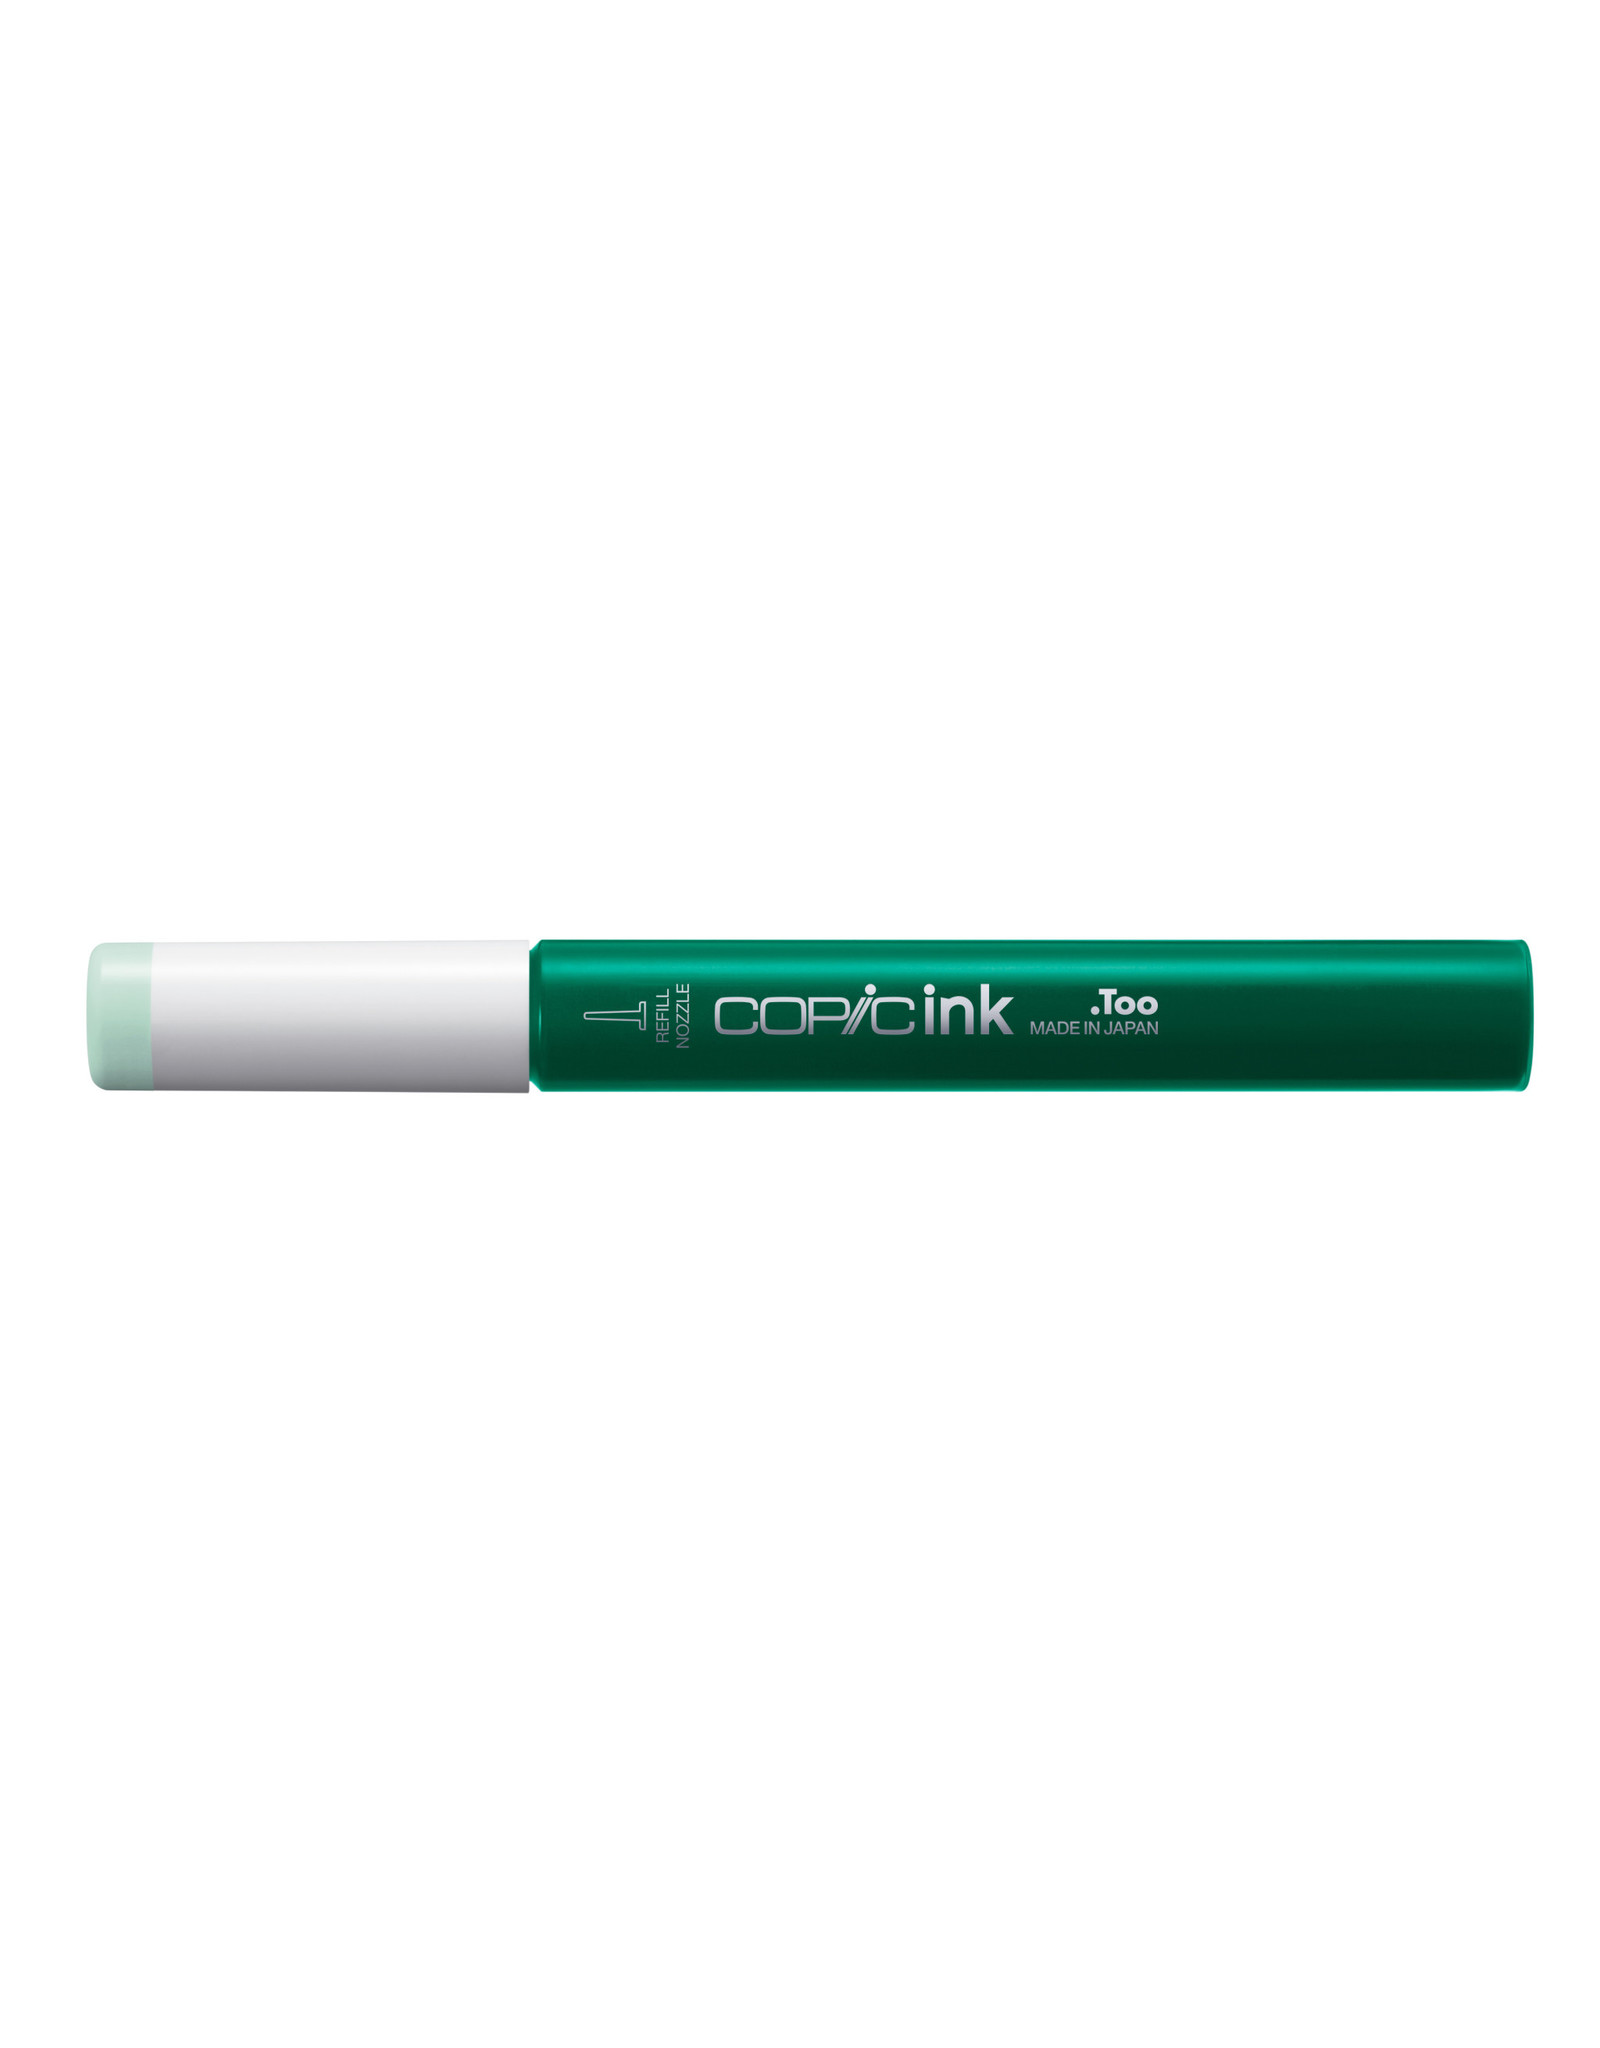 COPIC COPIC Ink 12ml G00 Jade Green